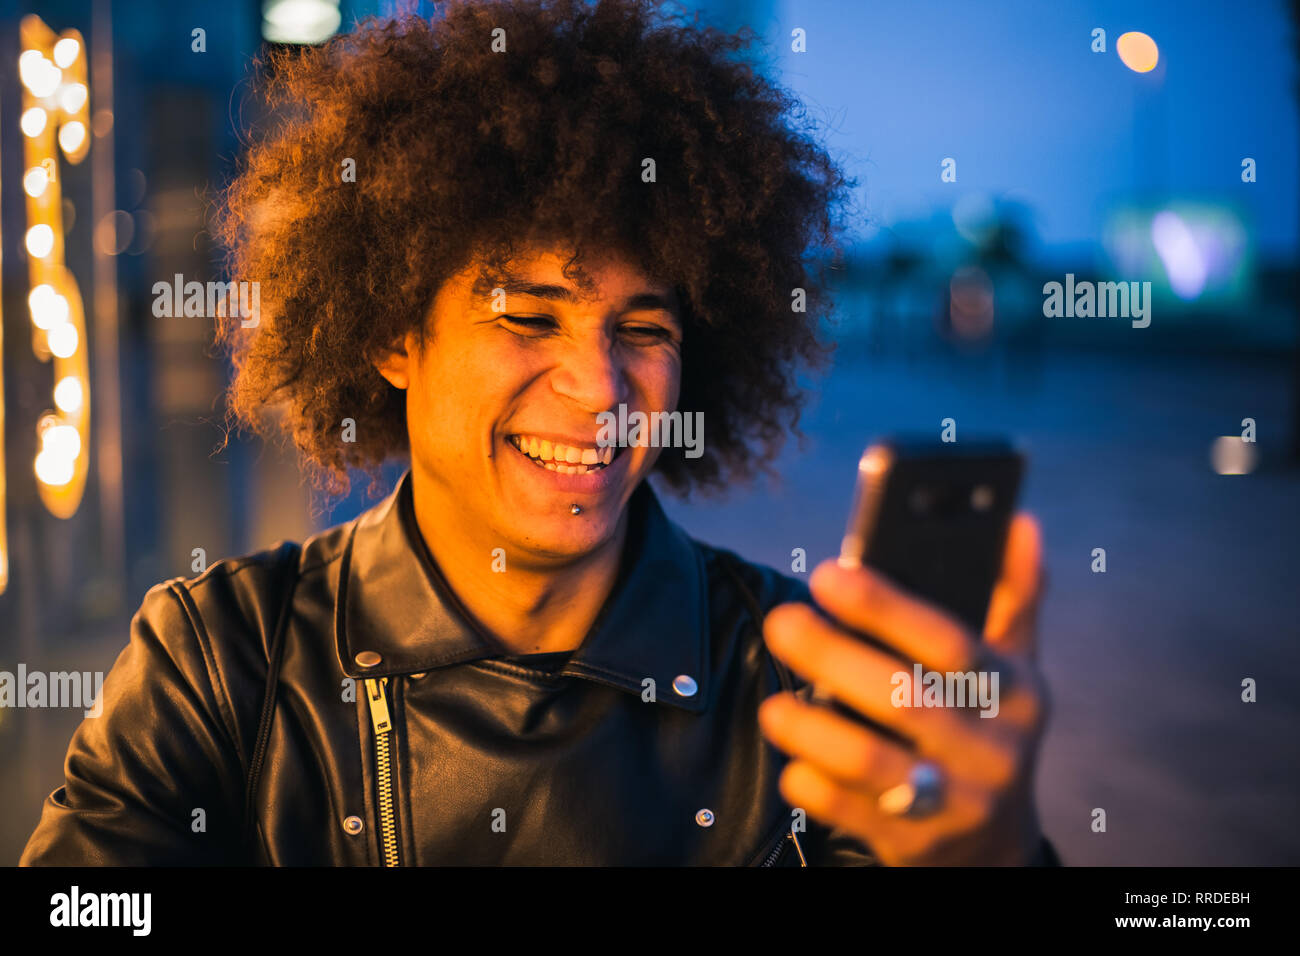 Stylish young man with afro hair smiling by using smart-phone in the street at night, illuminated by the lights of a showcase Stock Photo